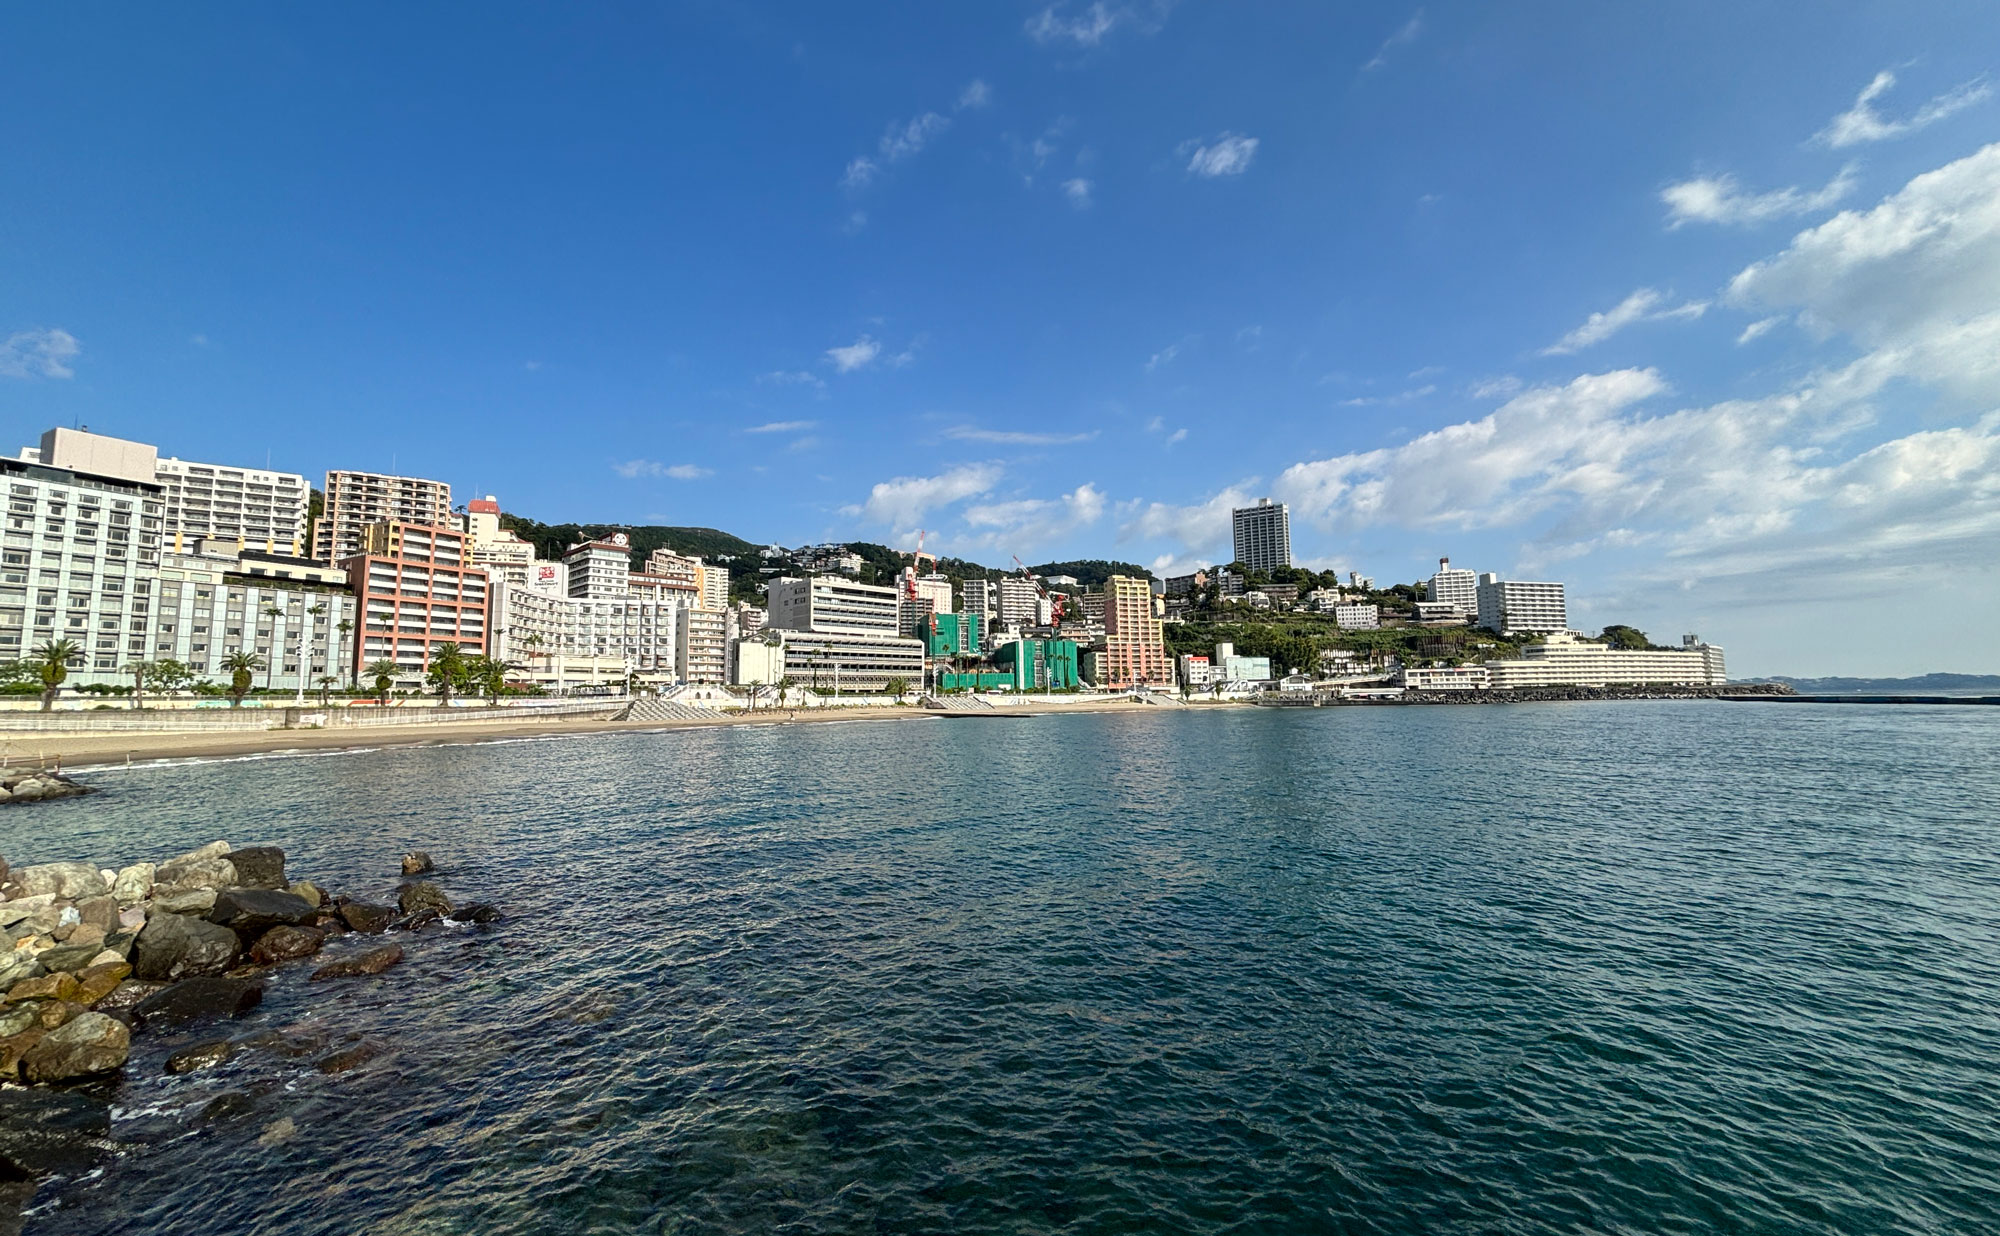 Hotels lined up on Atami Sun Beach